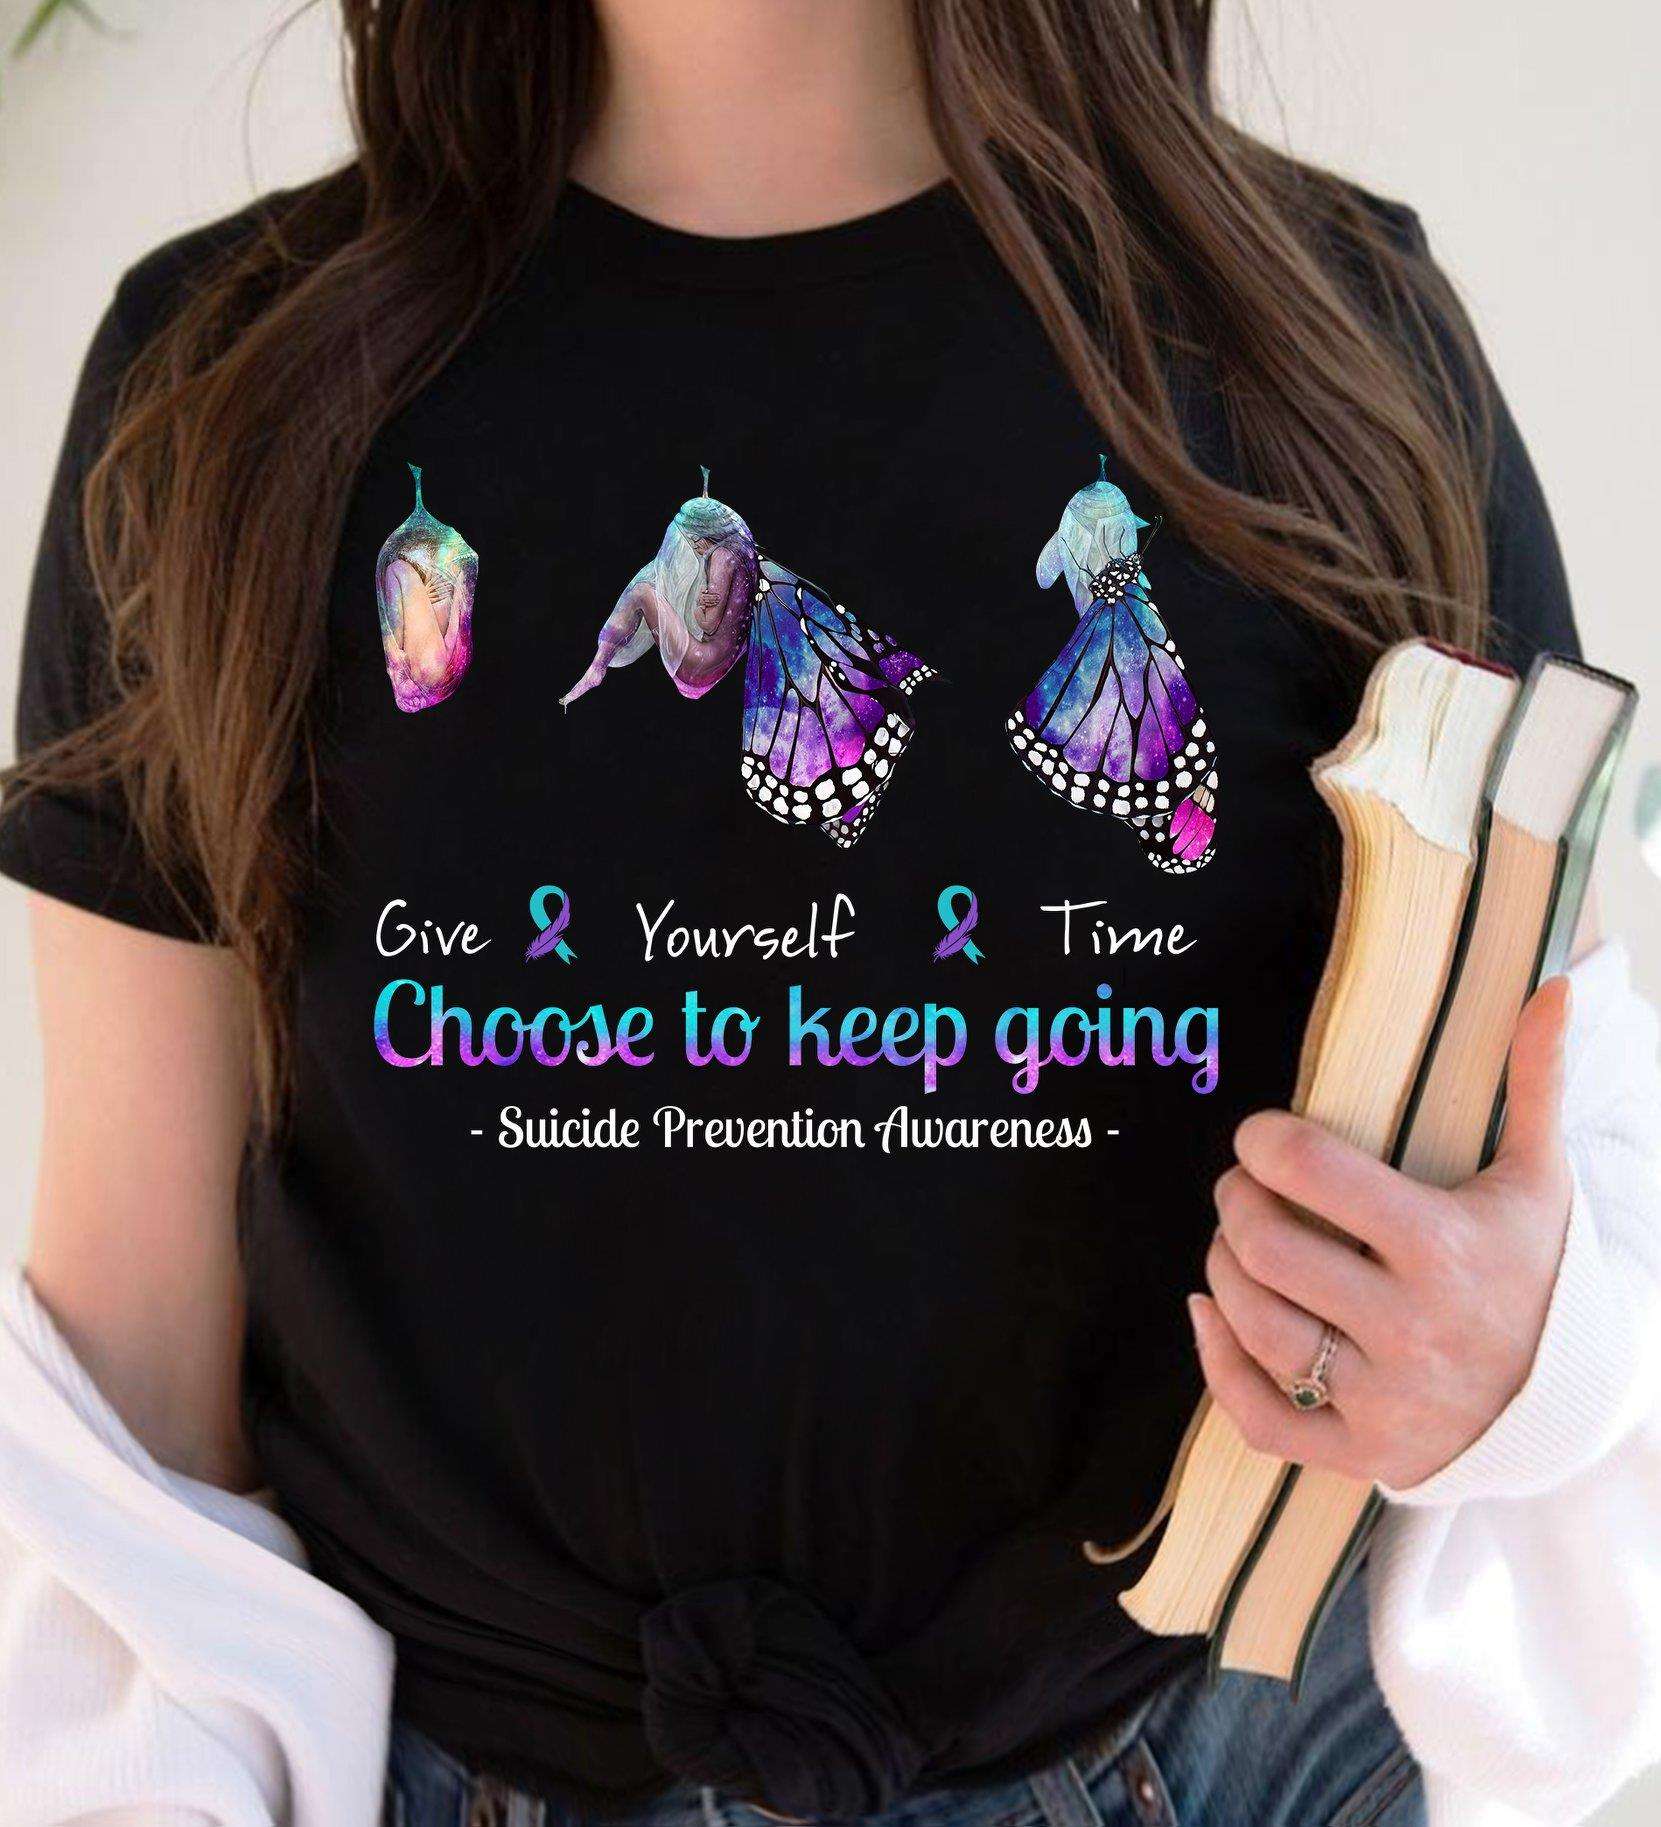 Butterfly Lover - Give yourself time choose to keep going suicide prevention awareness